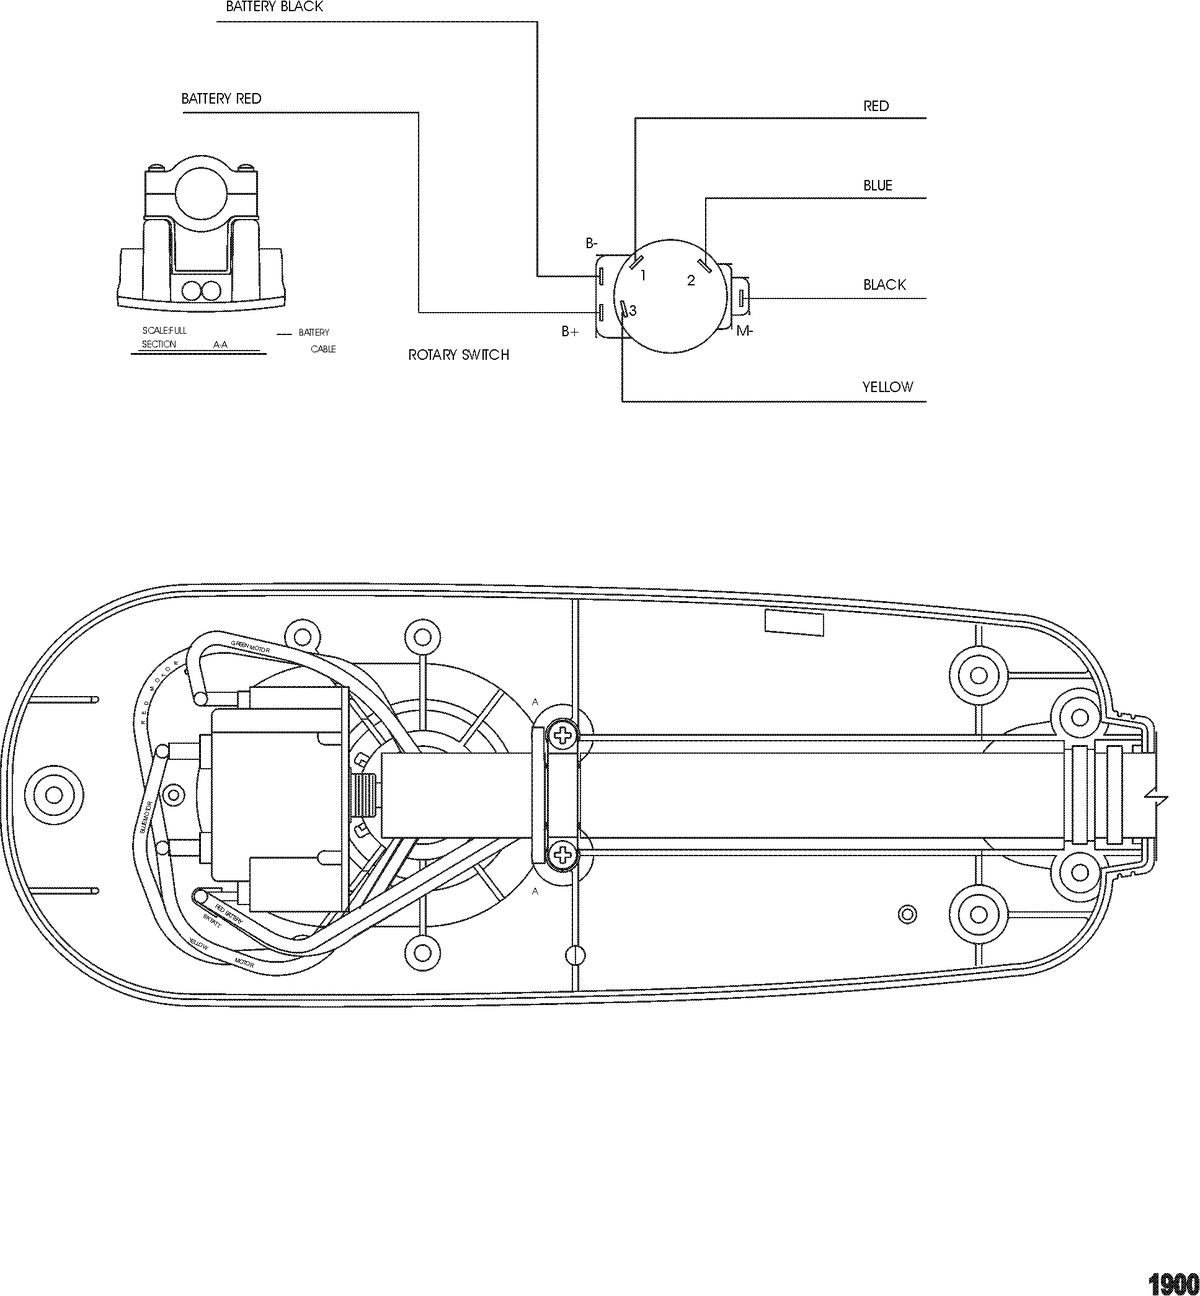 TROLLING MOTOR MOTORGUIDE THRUSTER SERIES Wire Diagram(Model T30) (Without Quick Connect)